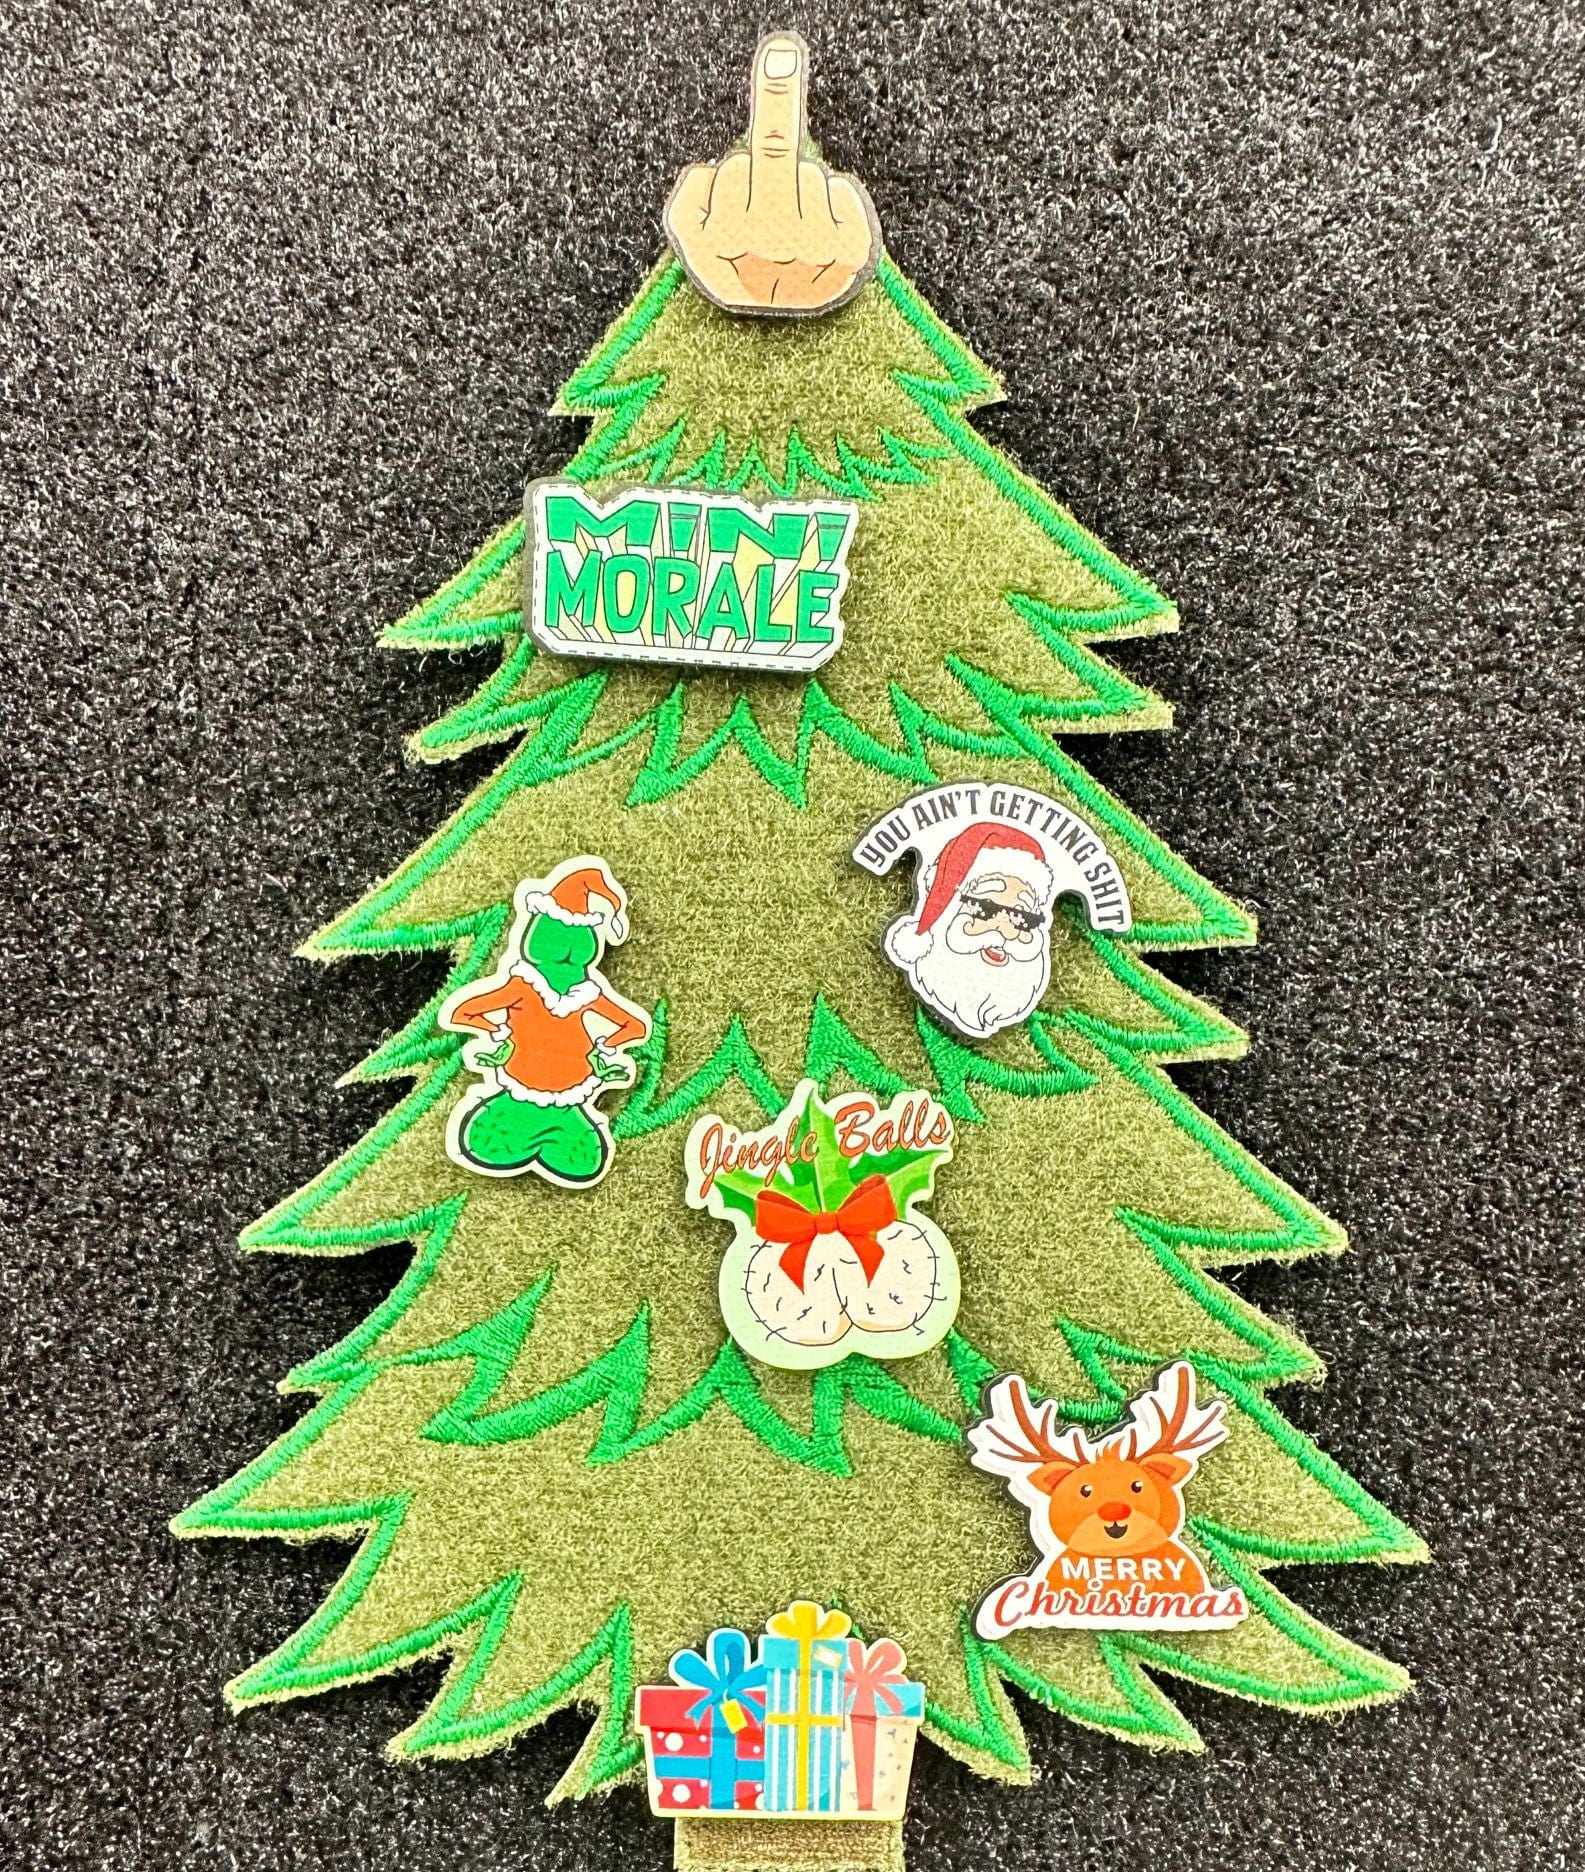 Tactical Gear Junkie Patches Mini Morale - Christmas Tree